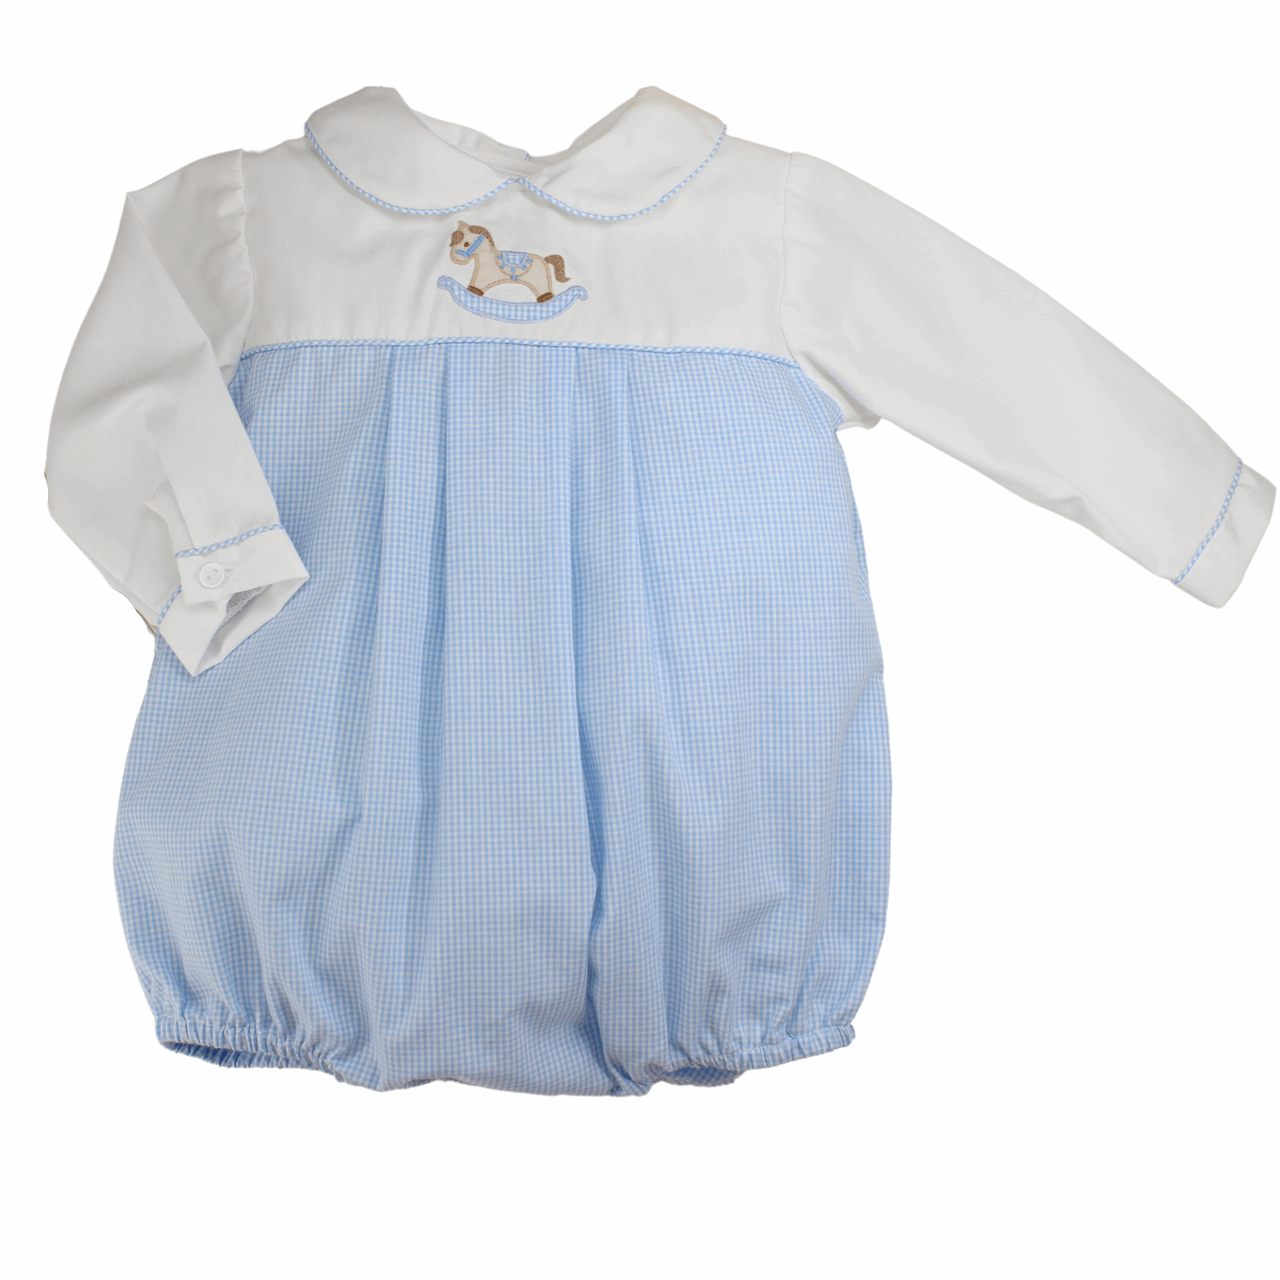 Baby Boy Bubble Outfit with Rocking Horse Blue Gingham